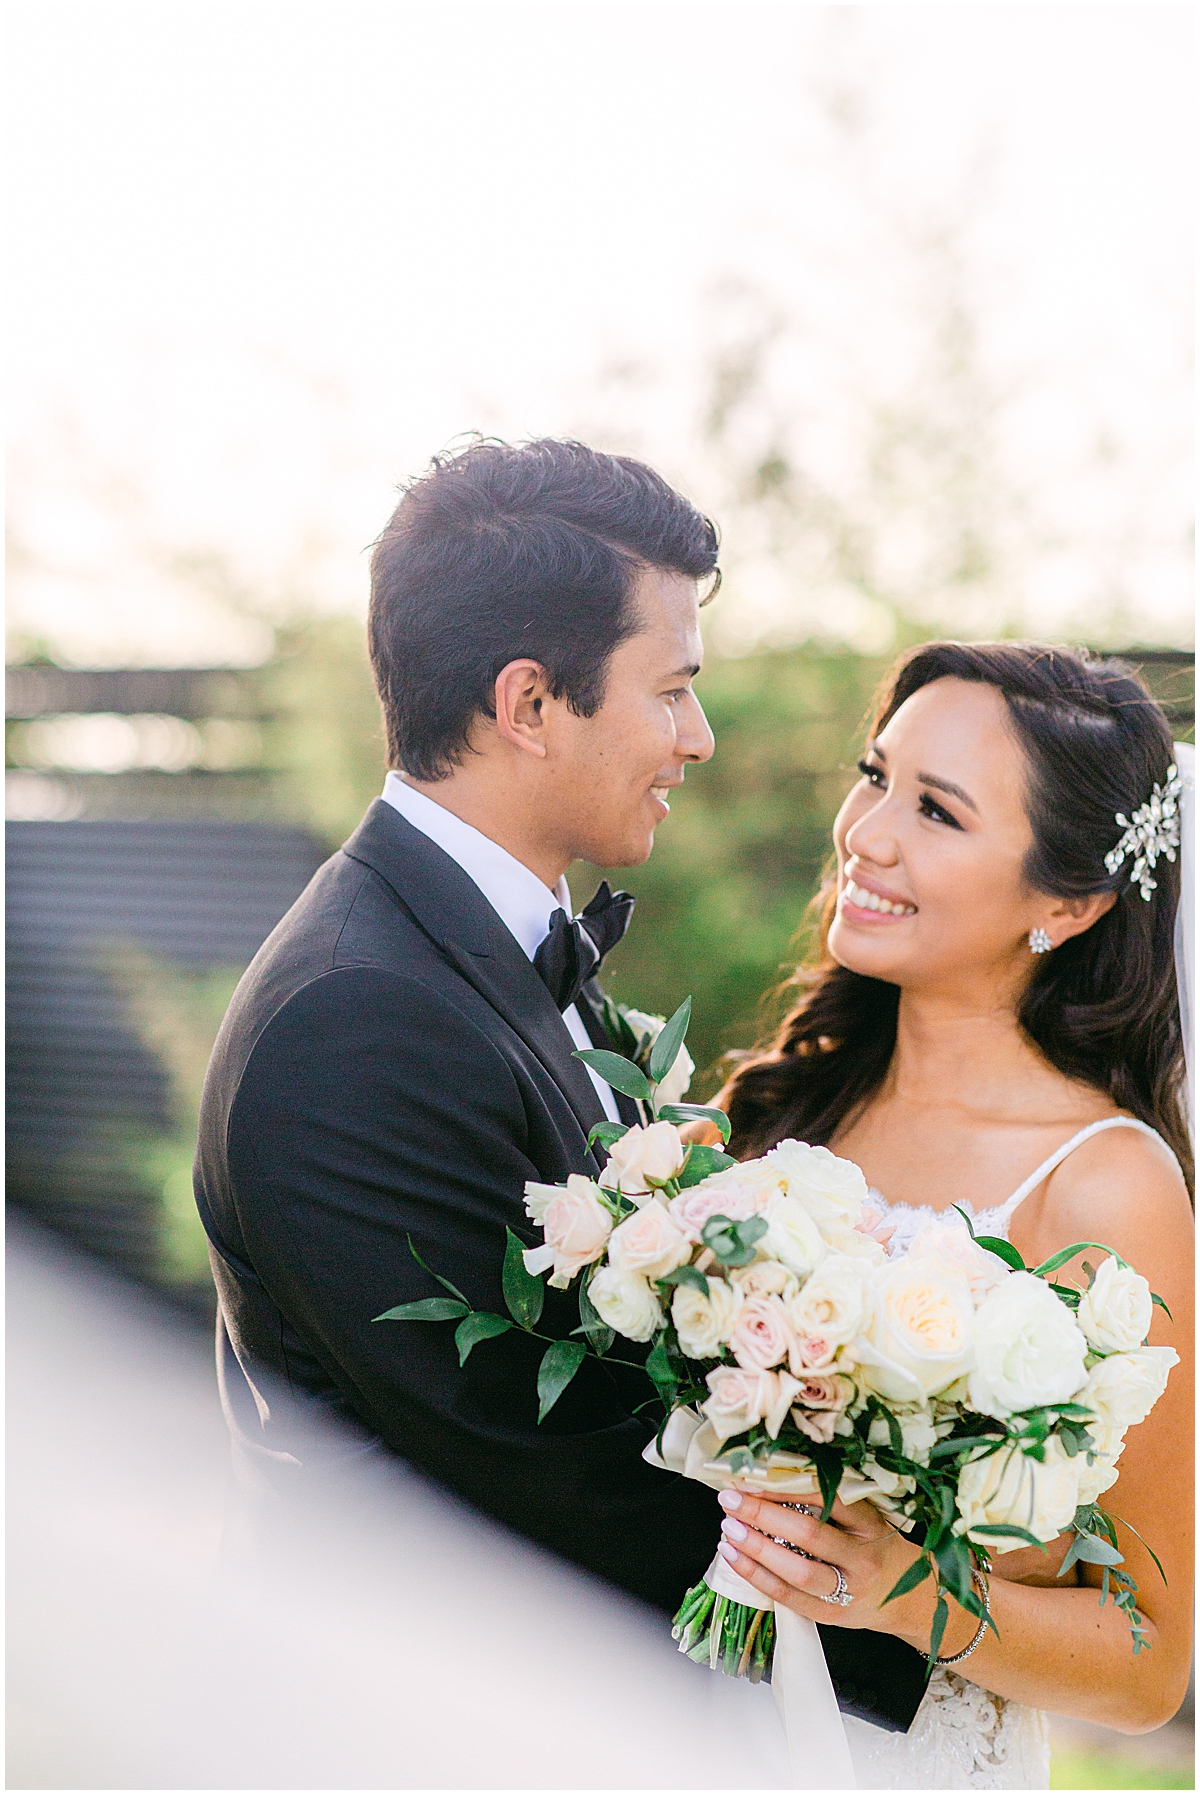 formal couple portraits | Knotting Hill Wedding Little Elm Texas Photography by Mary Talamantes